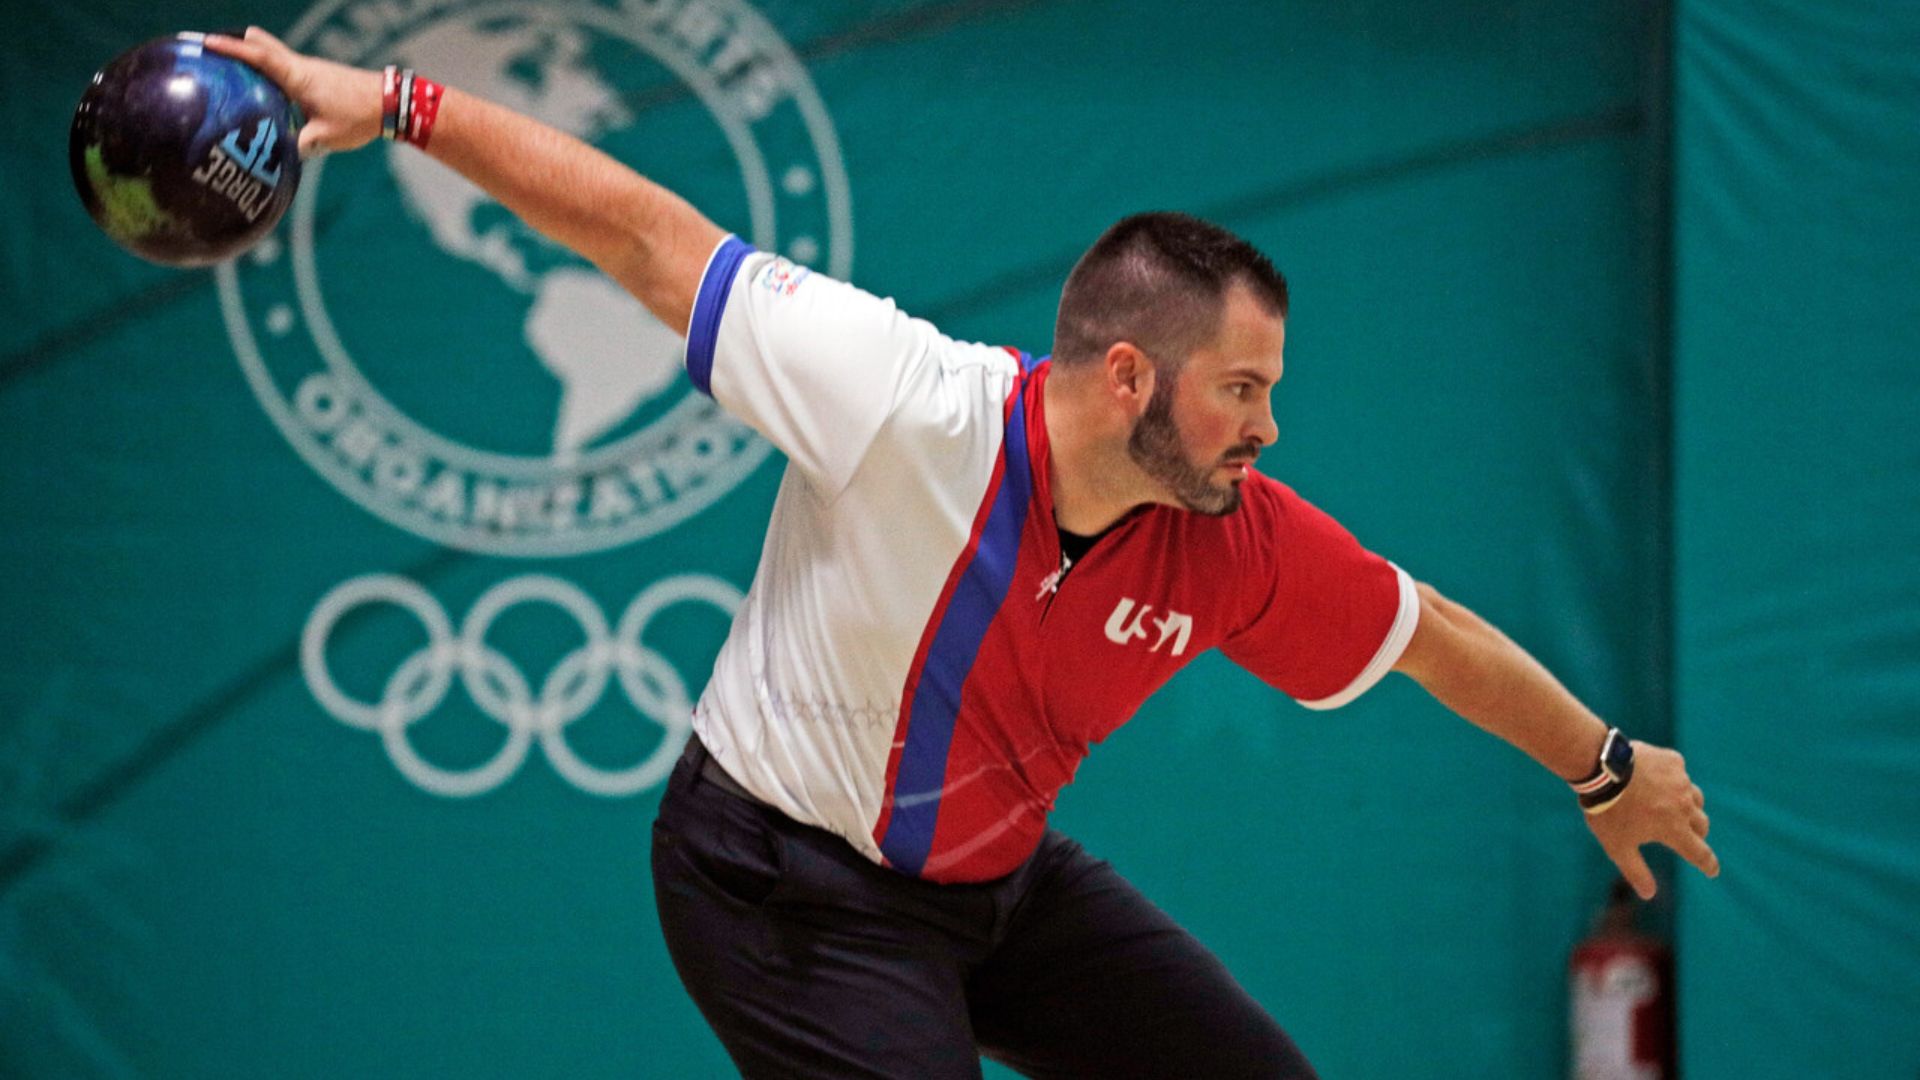 Male's Bowling: The United States Takes Home the Gold Medal